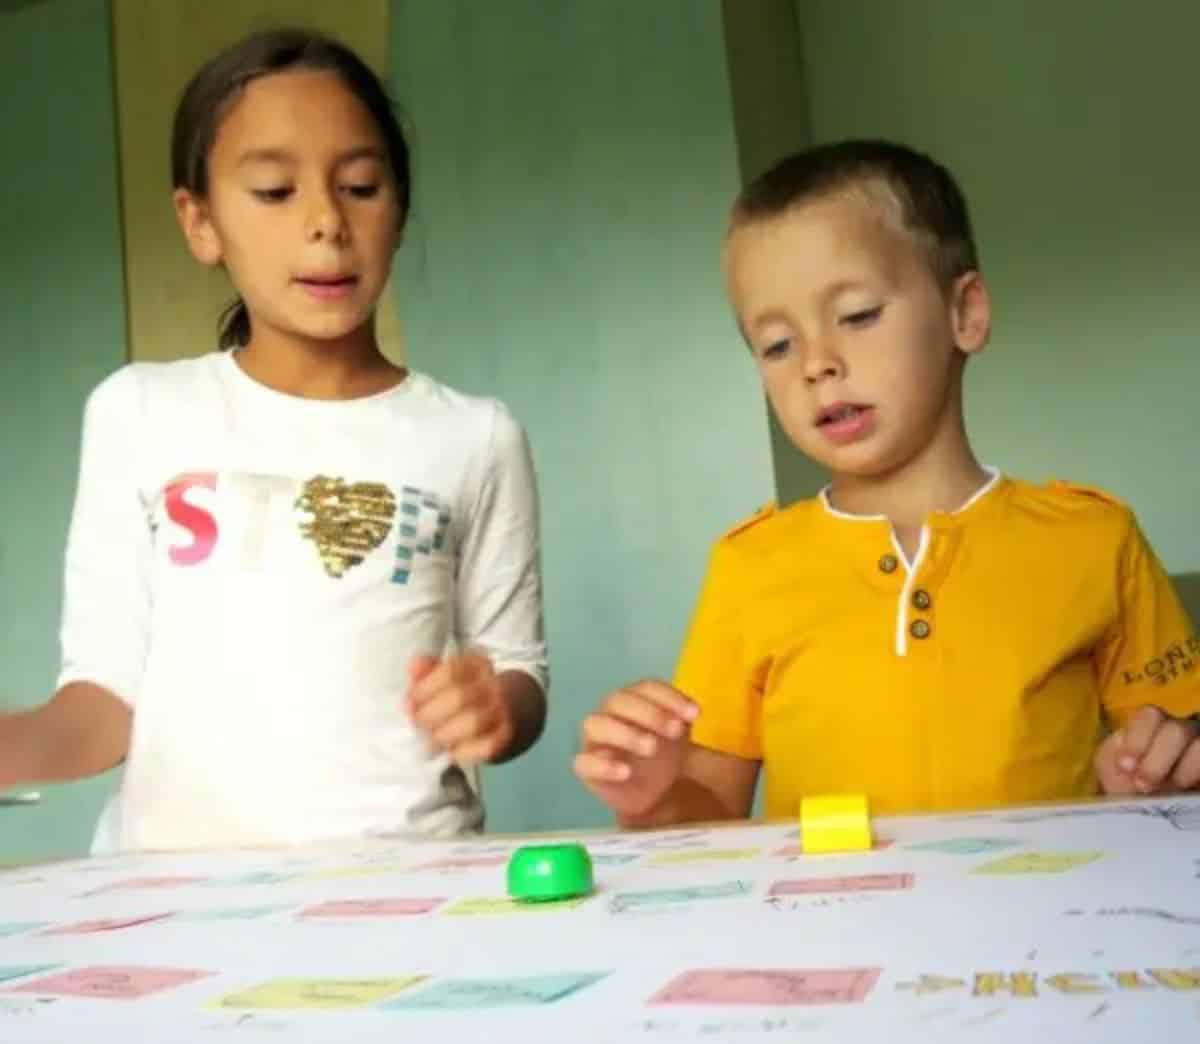 Two kids playing a board game together.